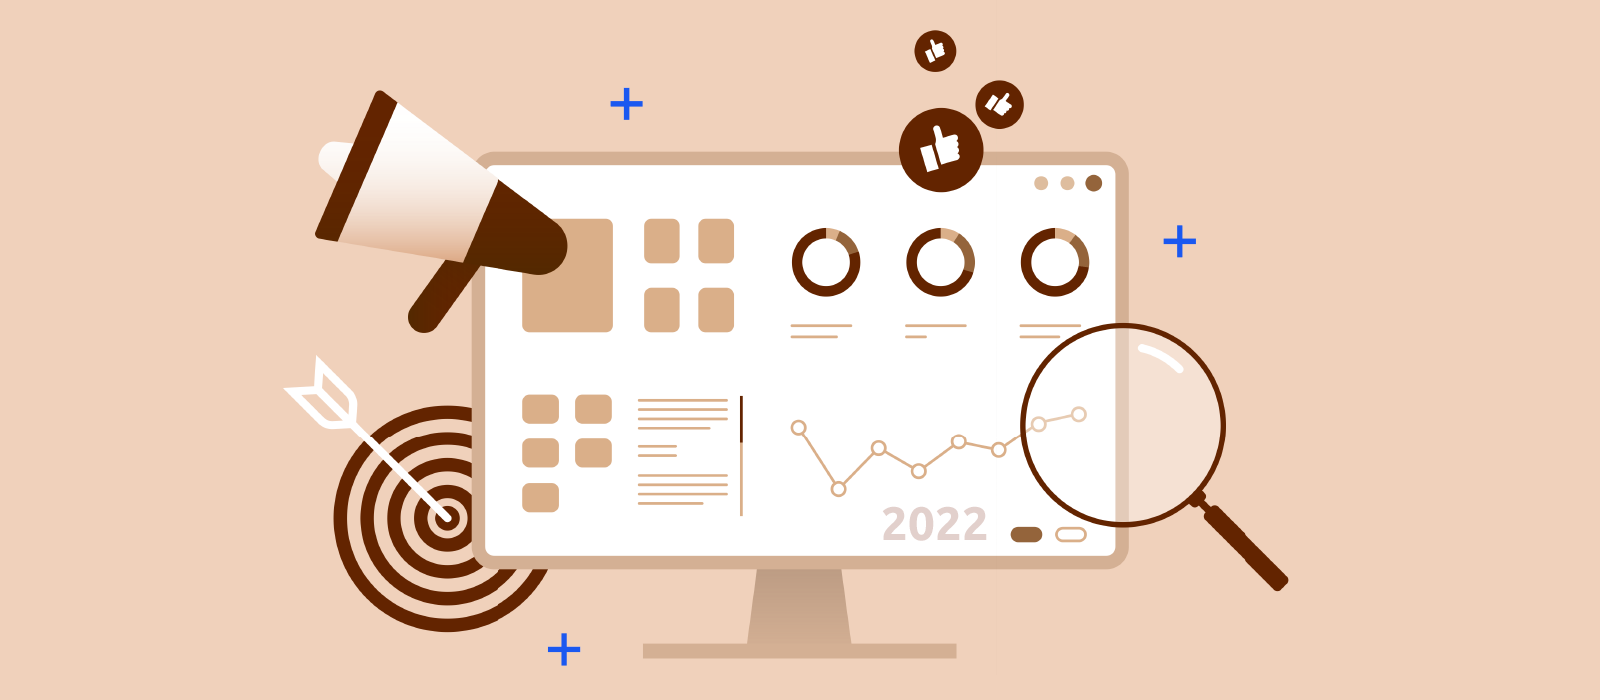 The Ultimate Guide to Google Search Console in 2023